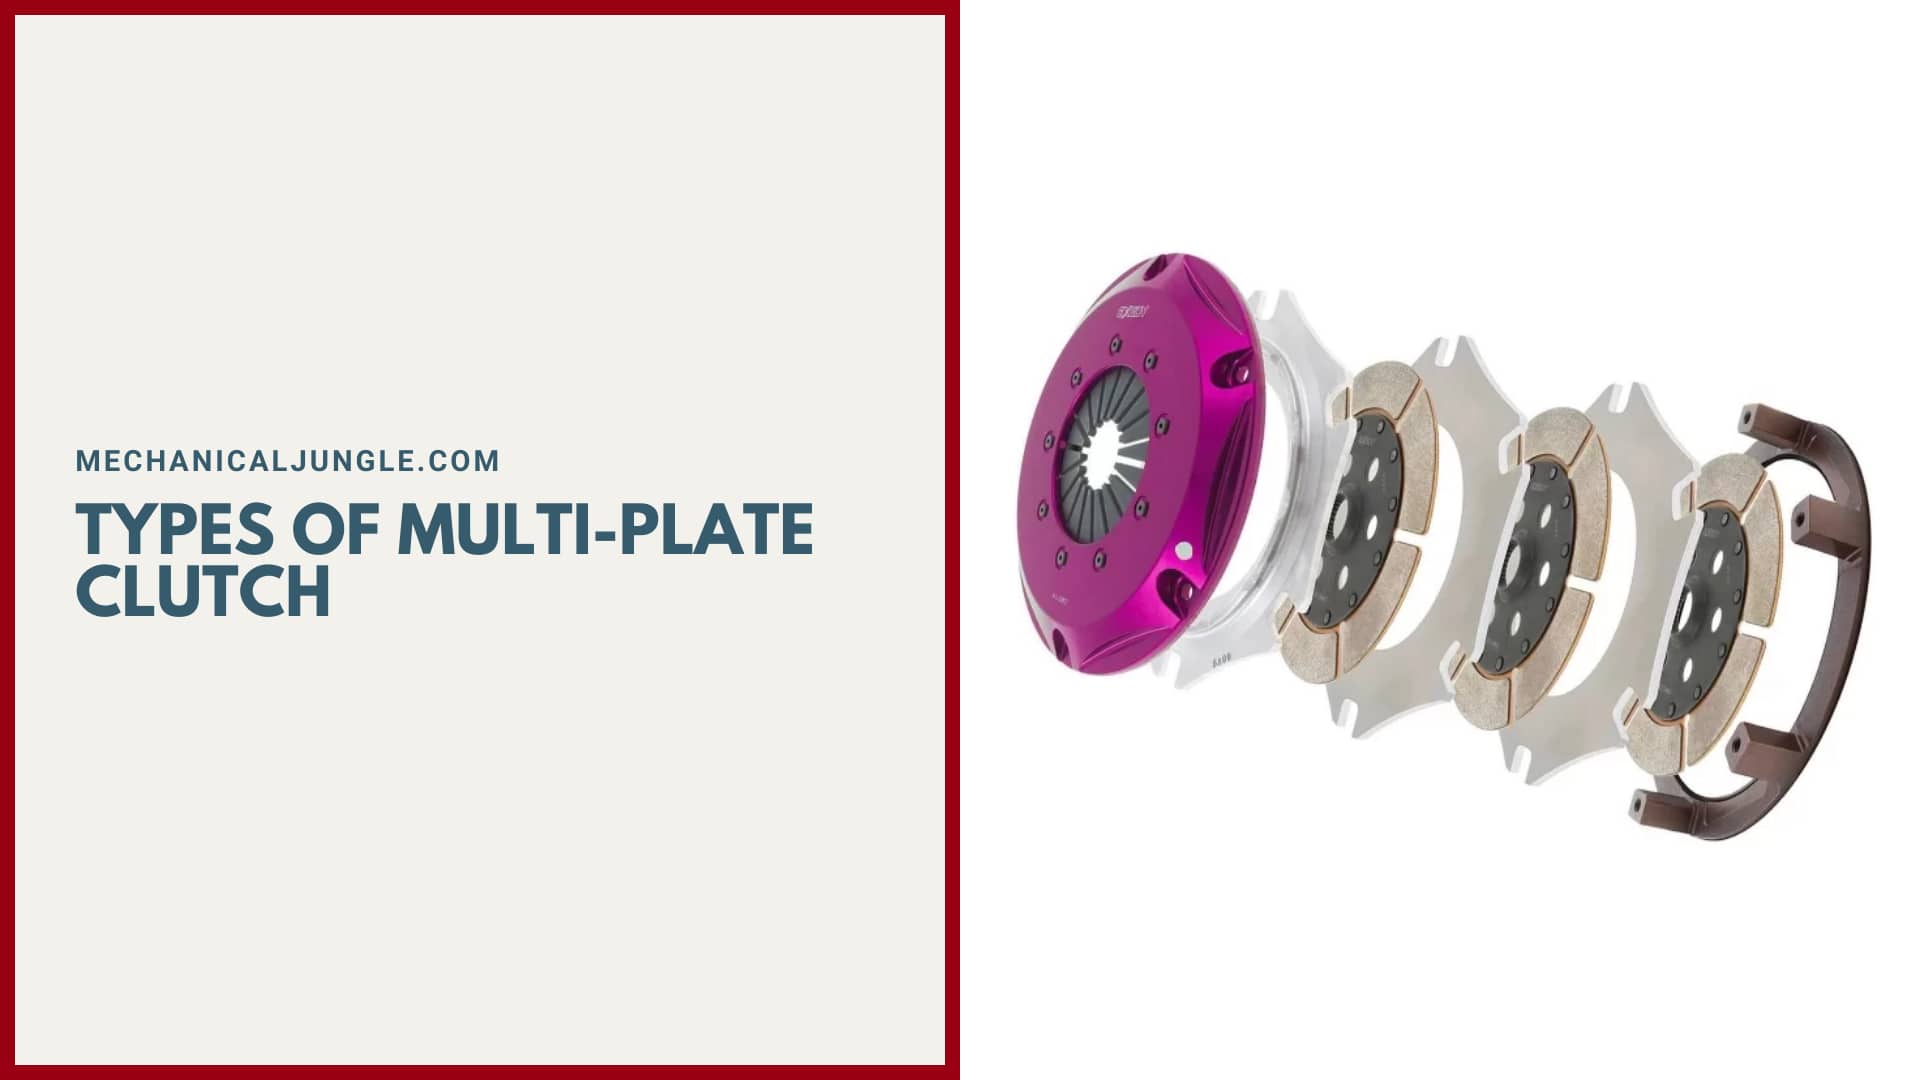 Types of Multi-Plate Clutch